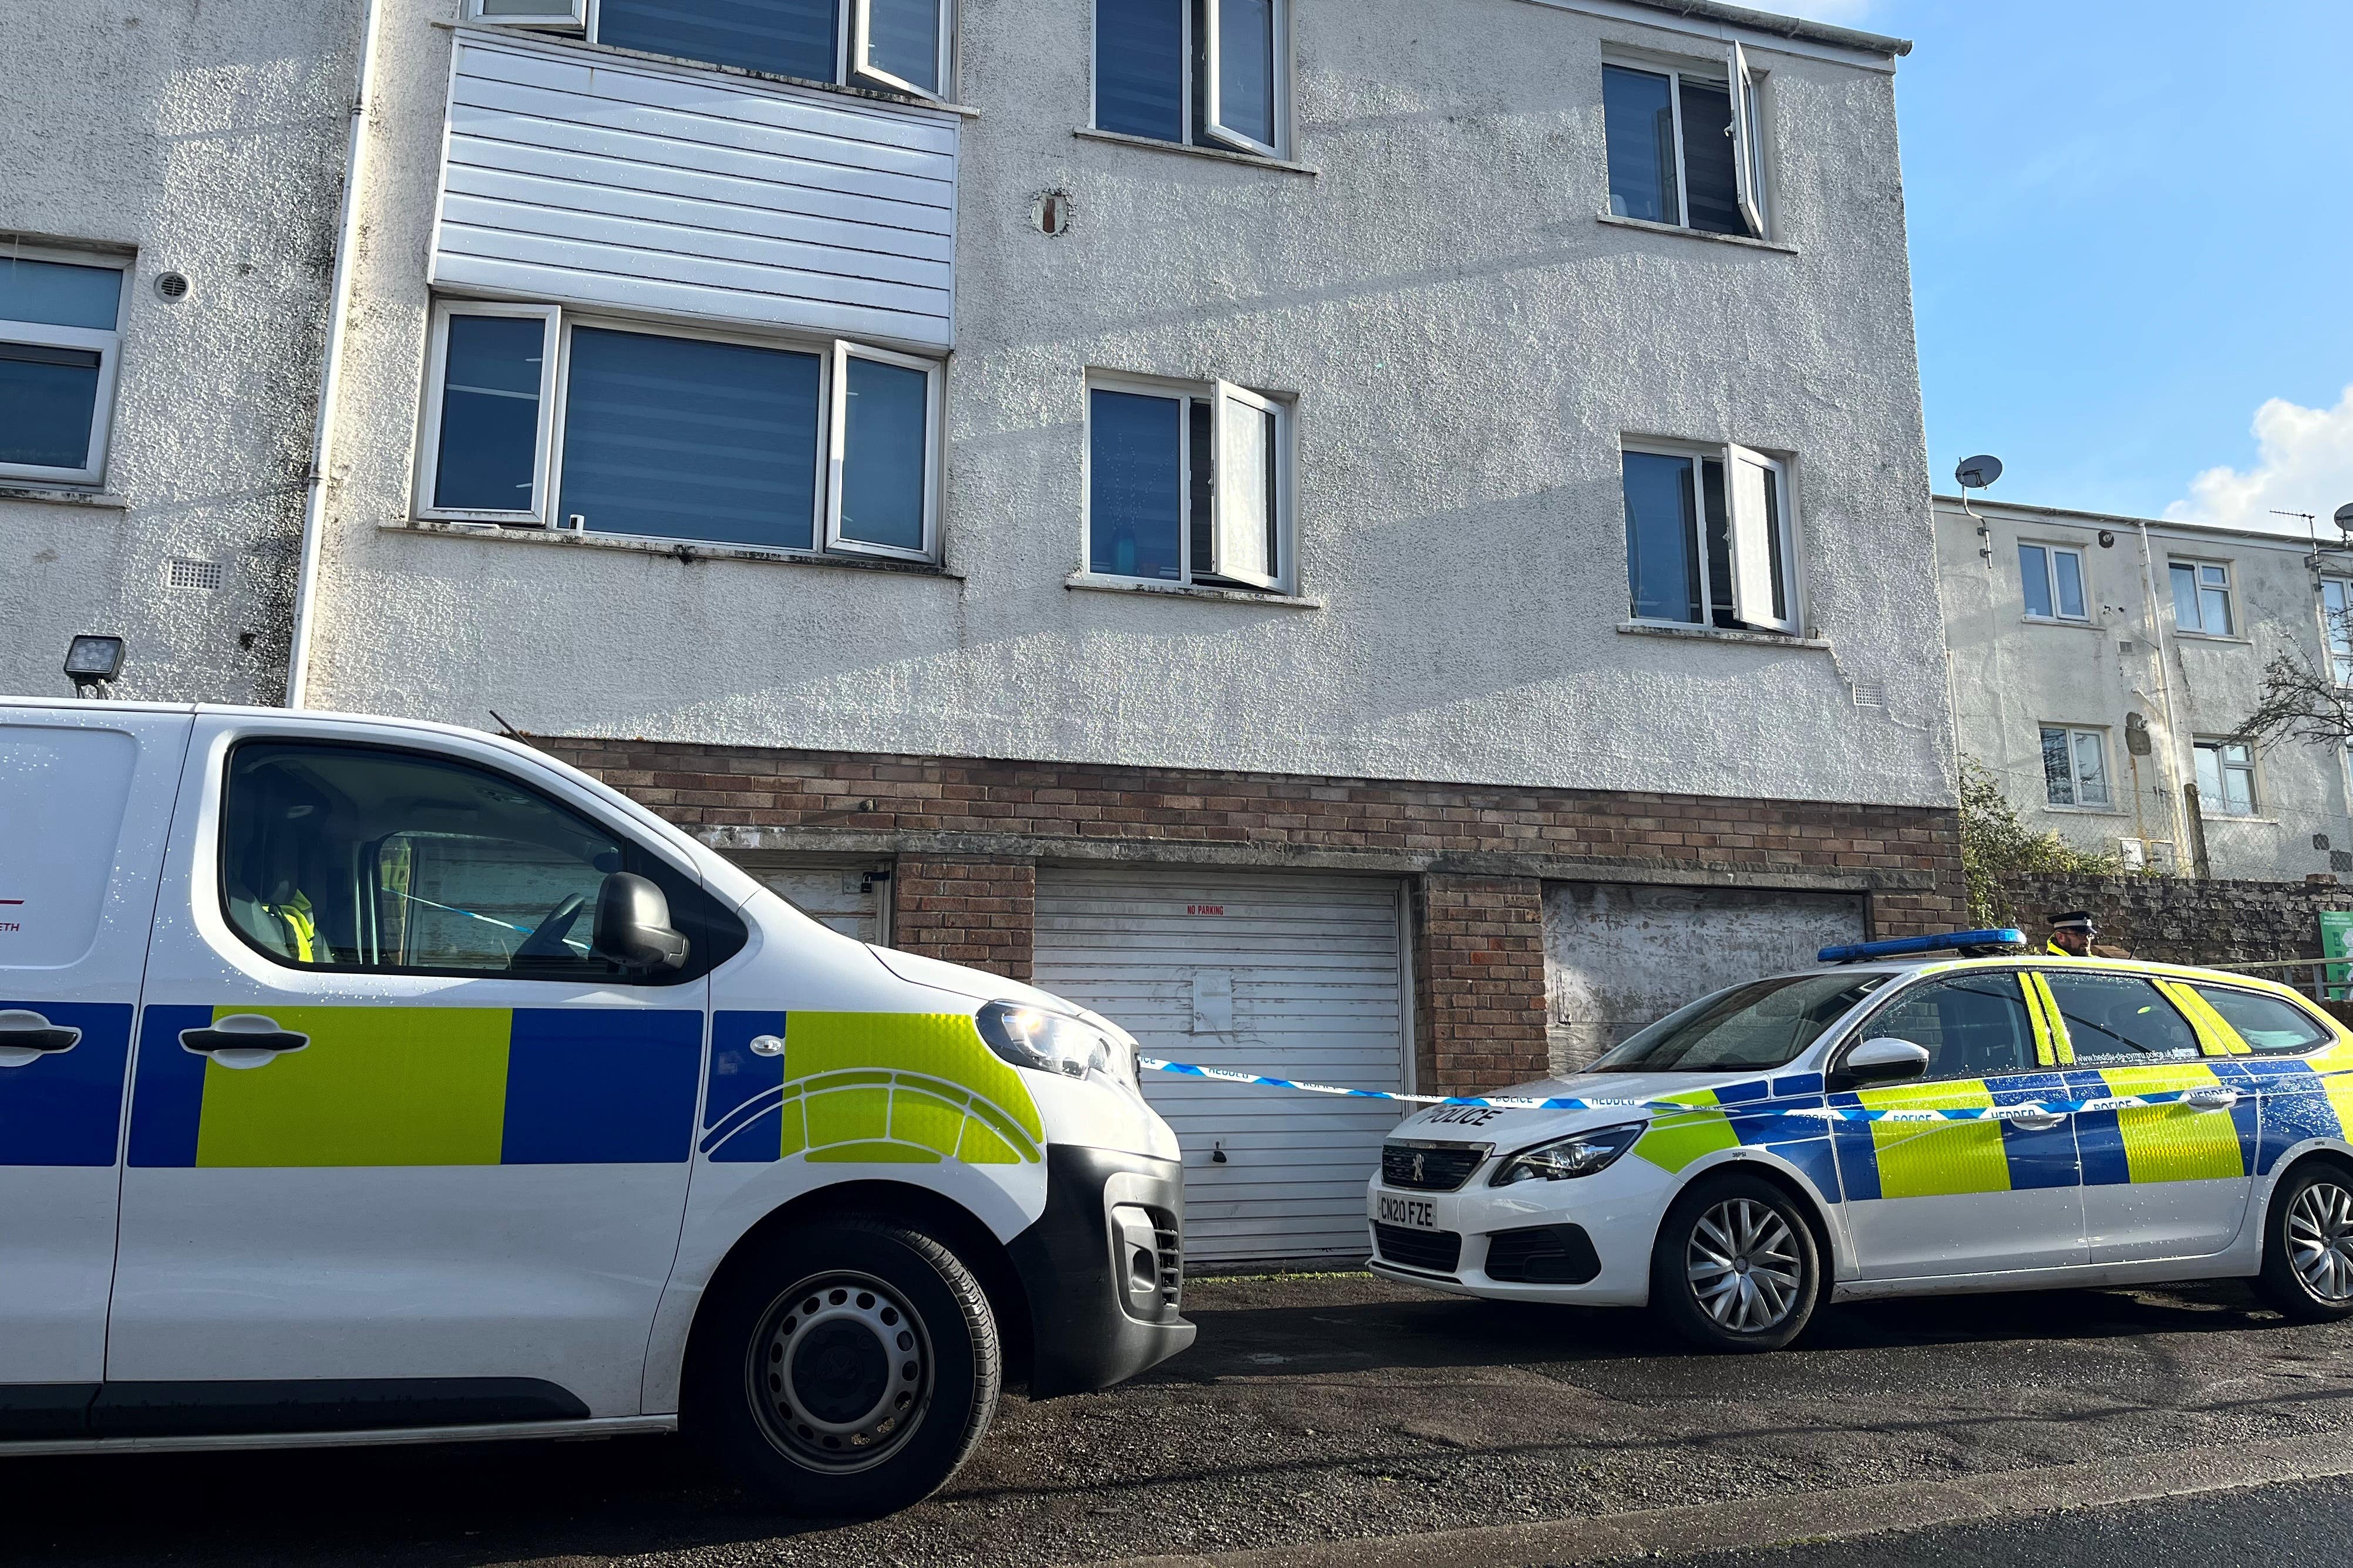 Three people remain in police custody following the discovery of the bodies of two babies at an end-of-terrace property in Wildmill, Bridgend (Rod Minchin/PA)